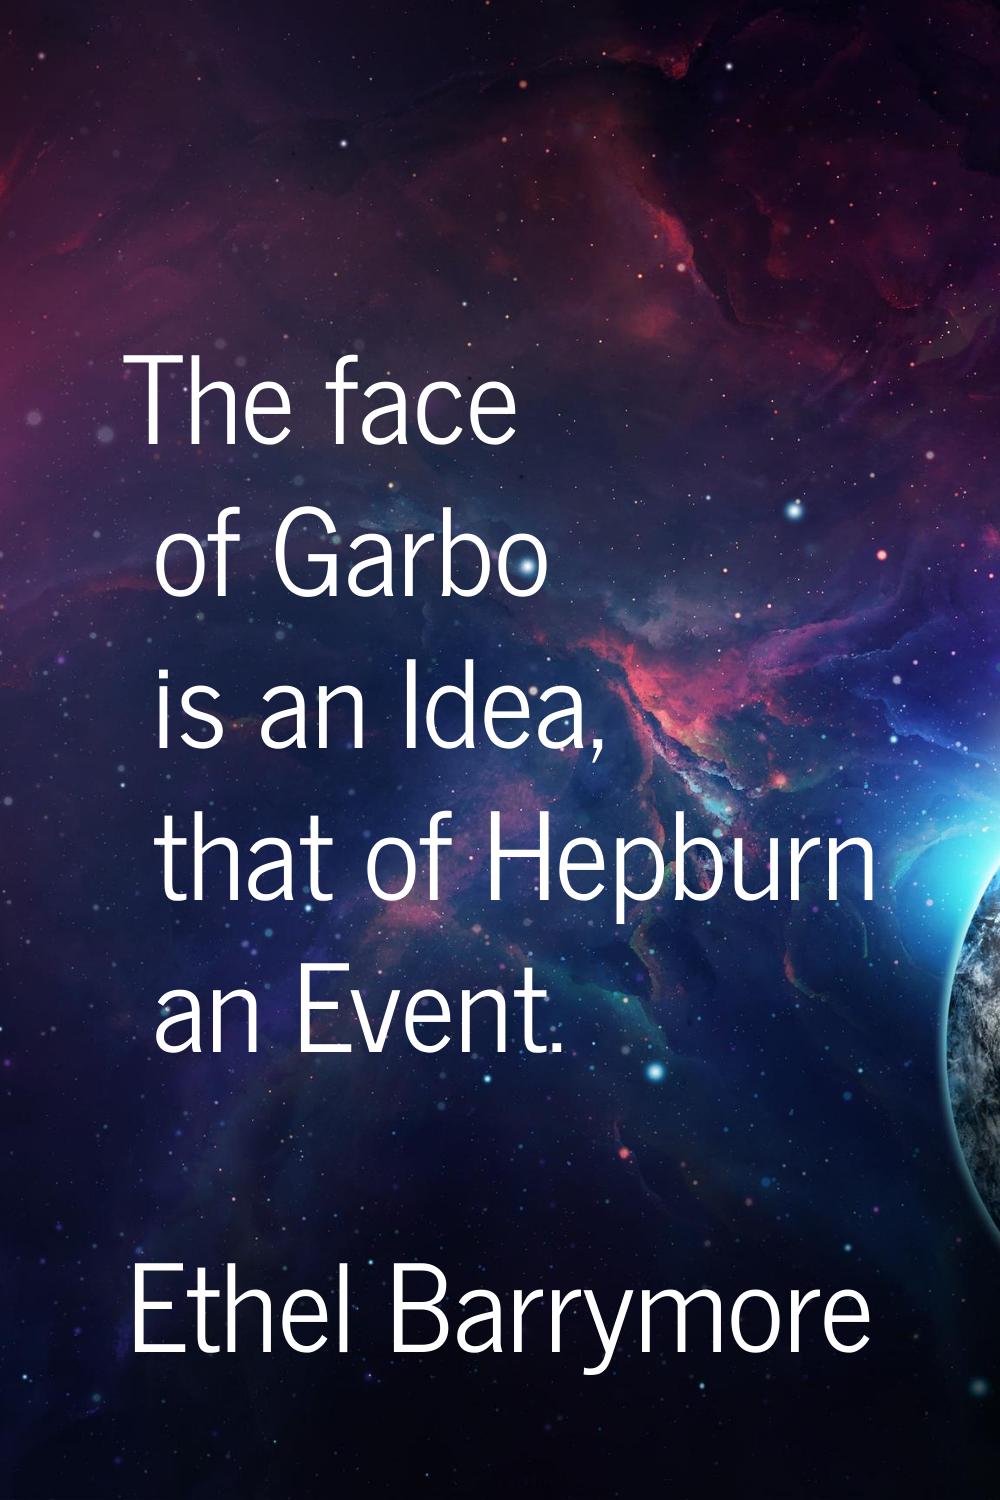 The face of Garbo is an Idea, that of Hepburn an Event.